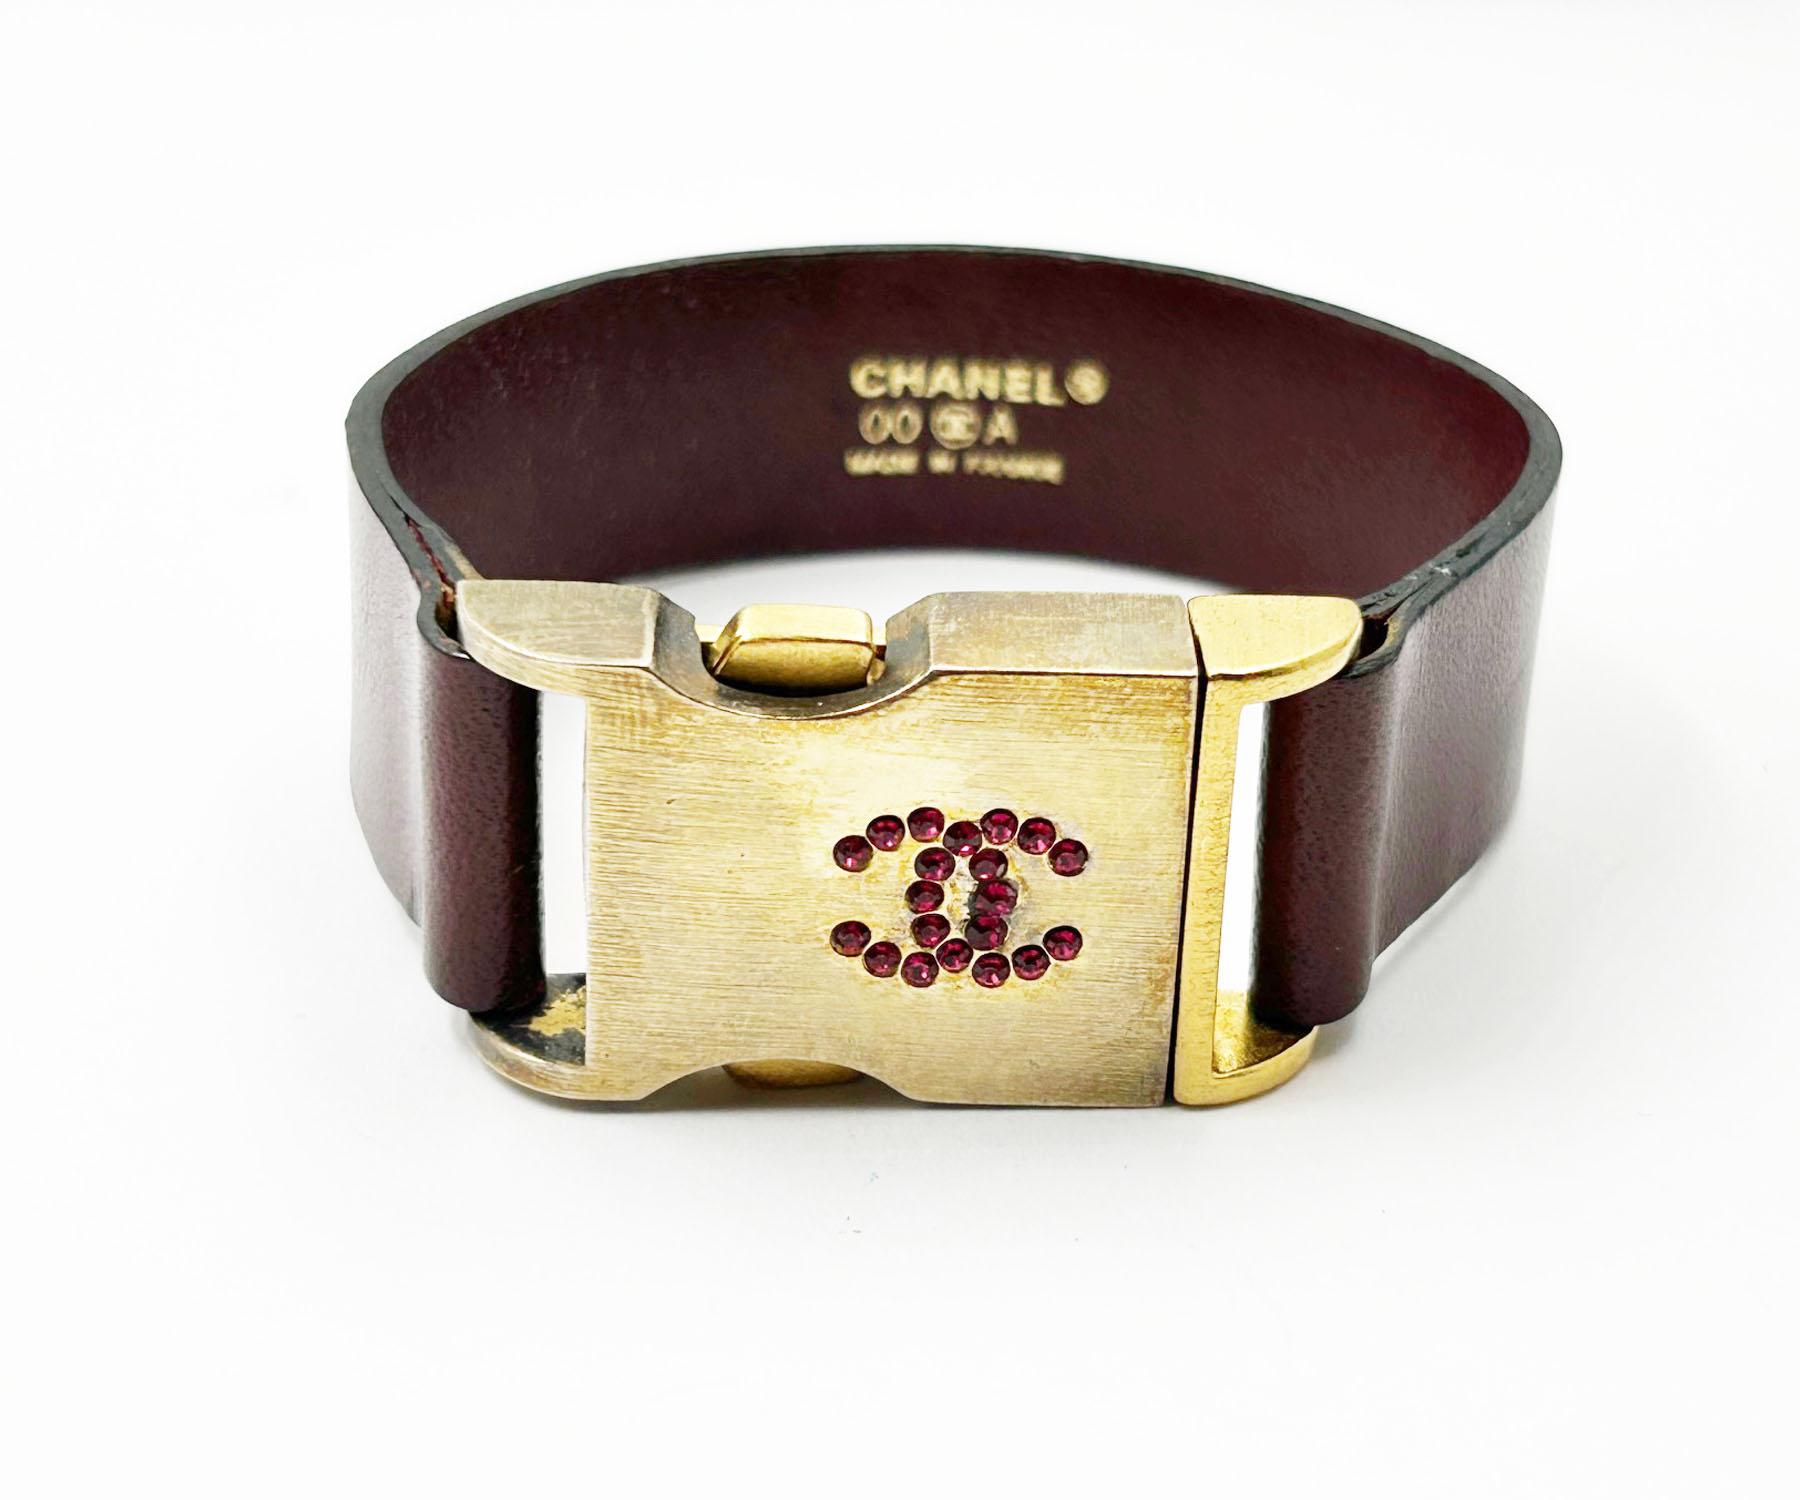 Chanel Rare Vintage Red Crystal Gold Buckle Leather Belt Bracelet 

*Marked 00
*Made in France

-Cuff size is approximately 0.9